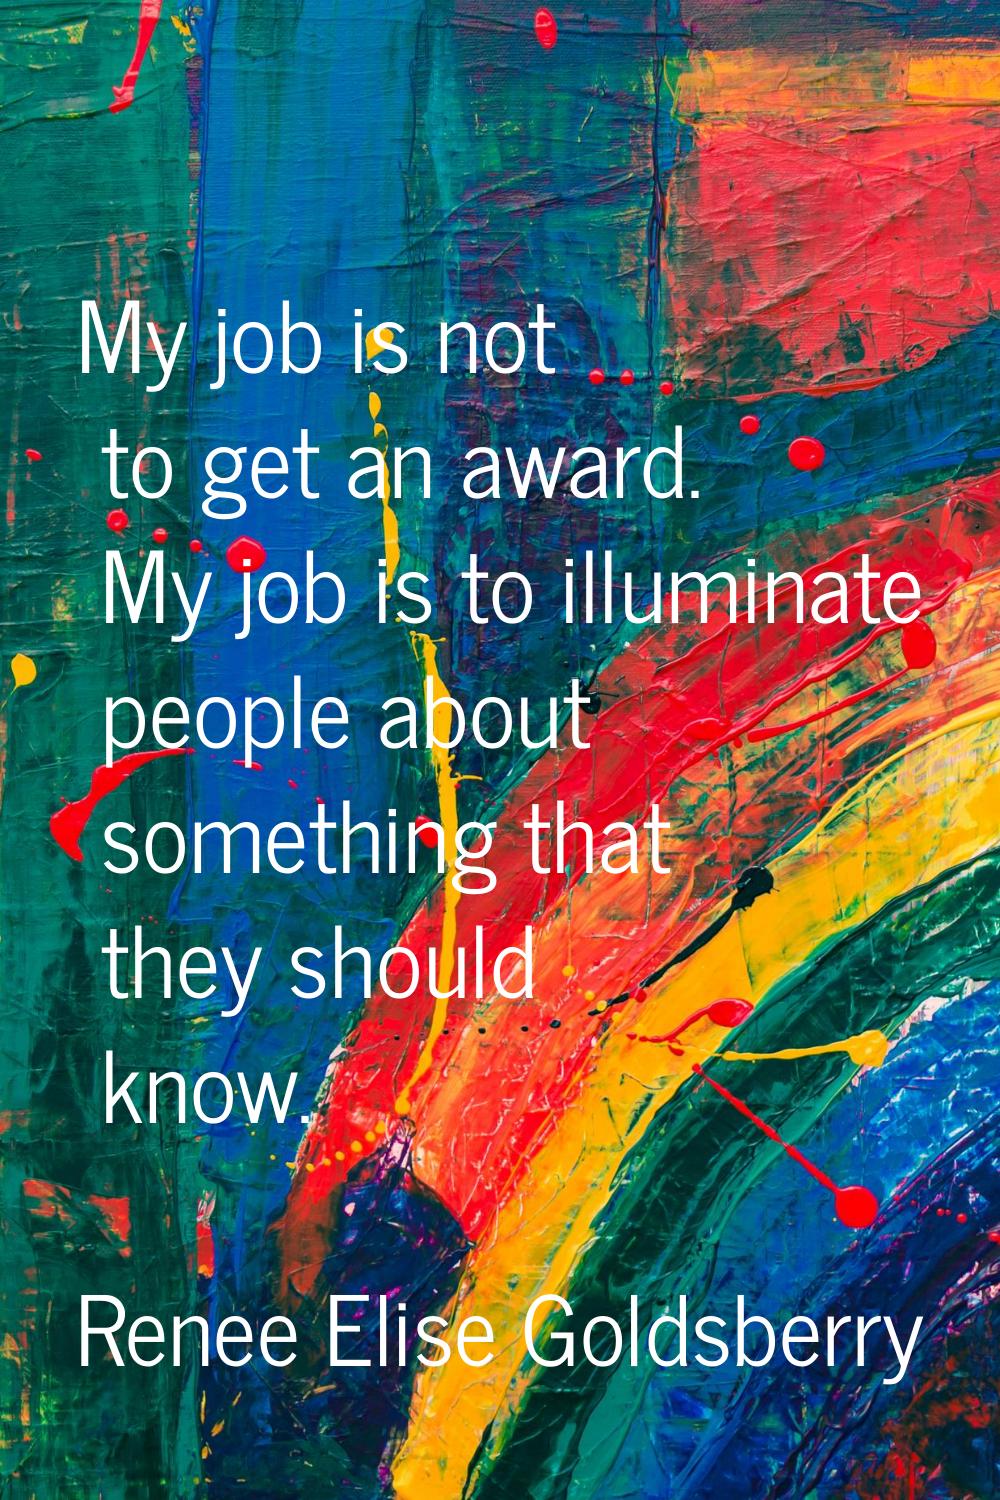 My job is not to get an award. My job is to illuminate people about something that they should know